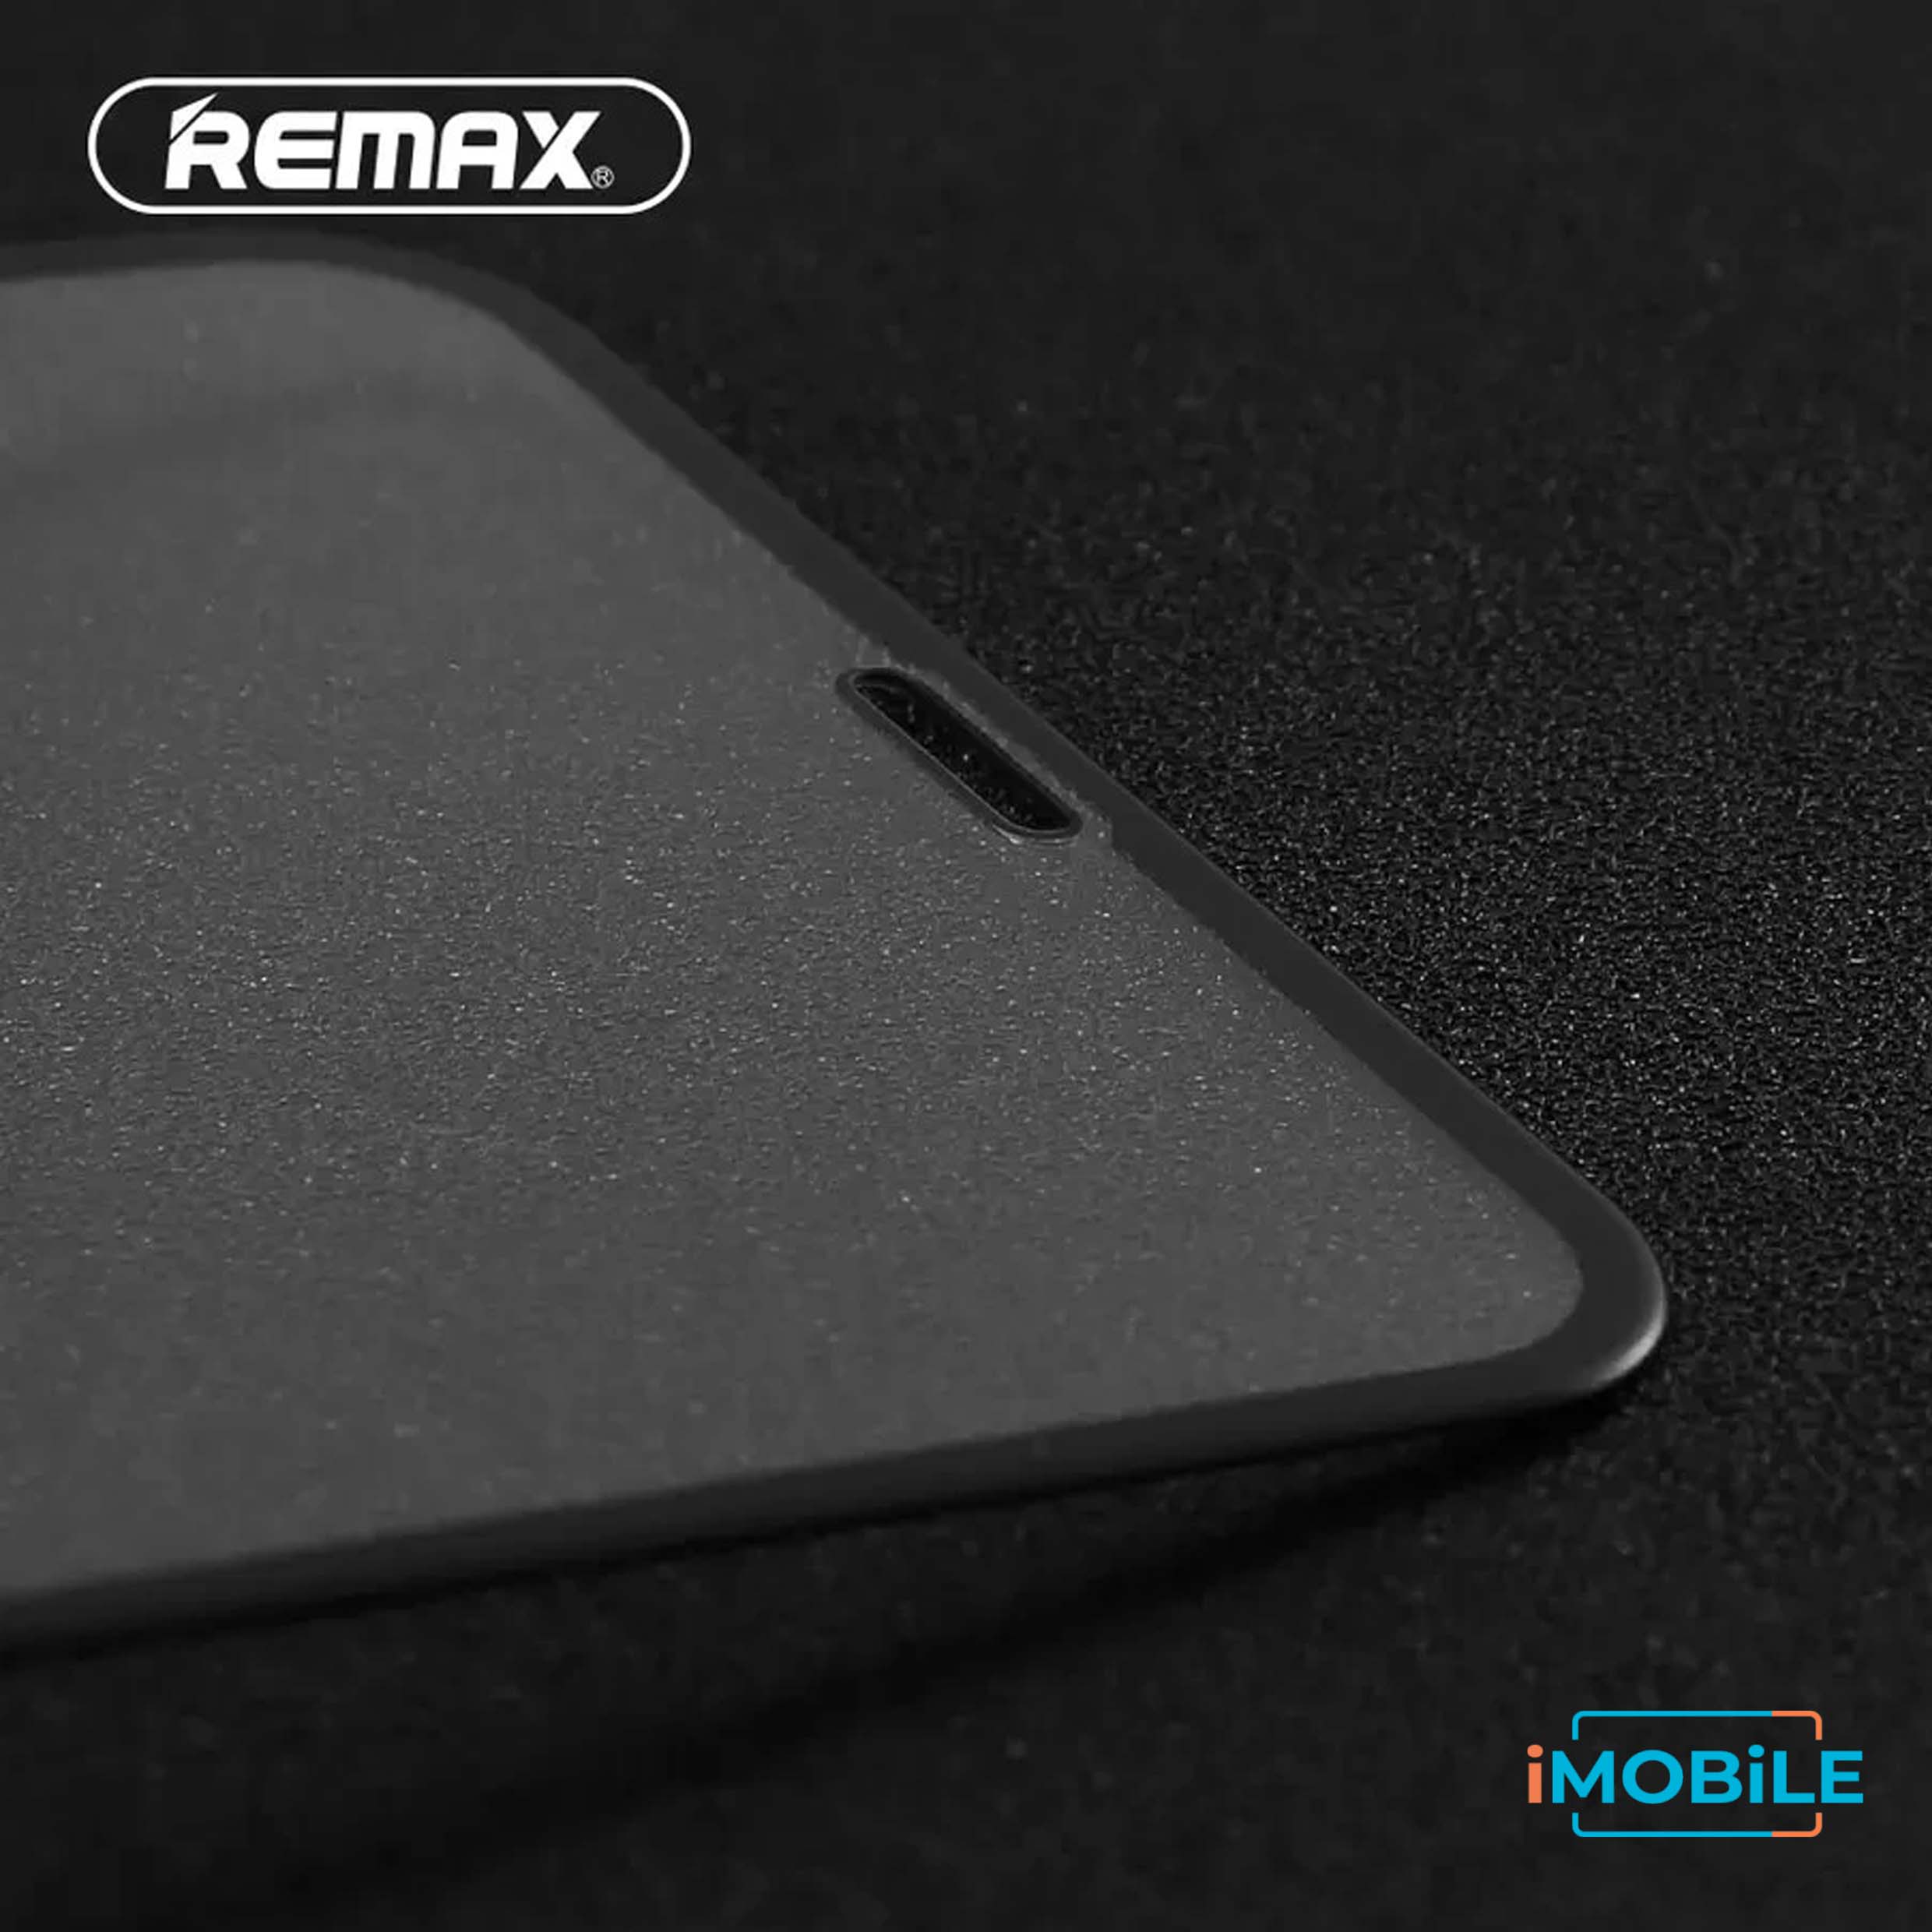 Remax 2.5D Tempered Glass with Envelope Pack, iPhone 12 Mini